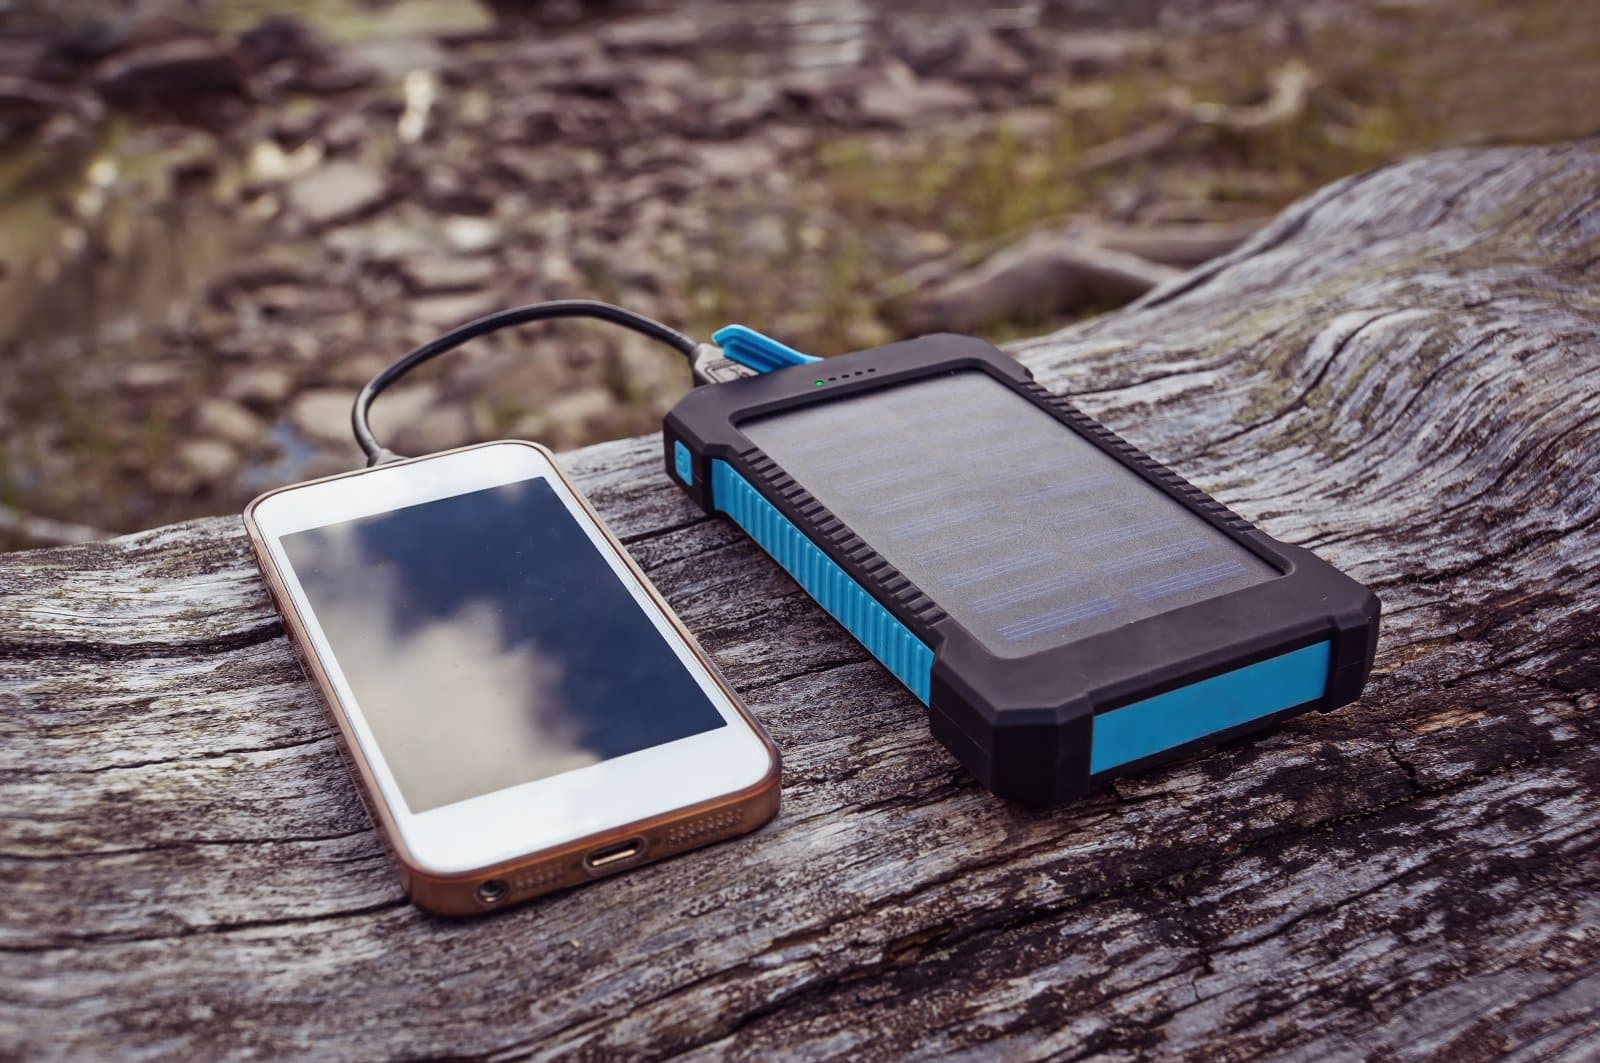 <p><span>A solar-powered charger is indispensable for the sustainable traveler. These chargers harness the power of the sun to keep your devices charged without relying on electricity. Ideal for off-grid adventures or locations where power is scarce, they come in various sizes and capacities. They are suitable for charging everything from phones to laptops.</span></p> <p><span>Many are designed to be lightweight and portable, with durable, weather-resistant materials. Using a solar-powered charger reduces reliance on non-renewable energy sources. It minimizes your carbon footprint while keeping you connected.</span></p> <p><b>Insider’s Tip: </b><span>Choose a charger with a built-in battery pack for storing solar energy, allowing you to charge devices even when there’s no sunlight.</span></p>